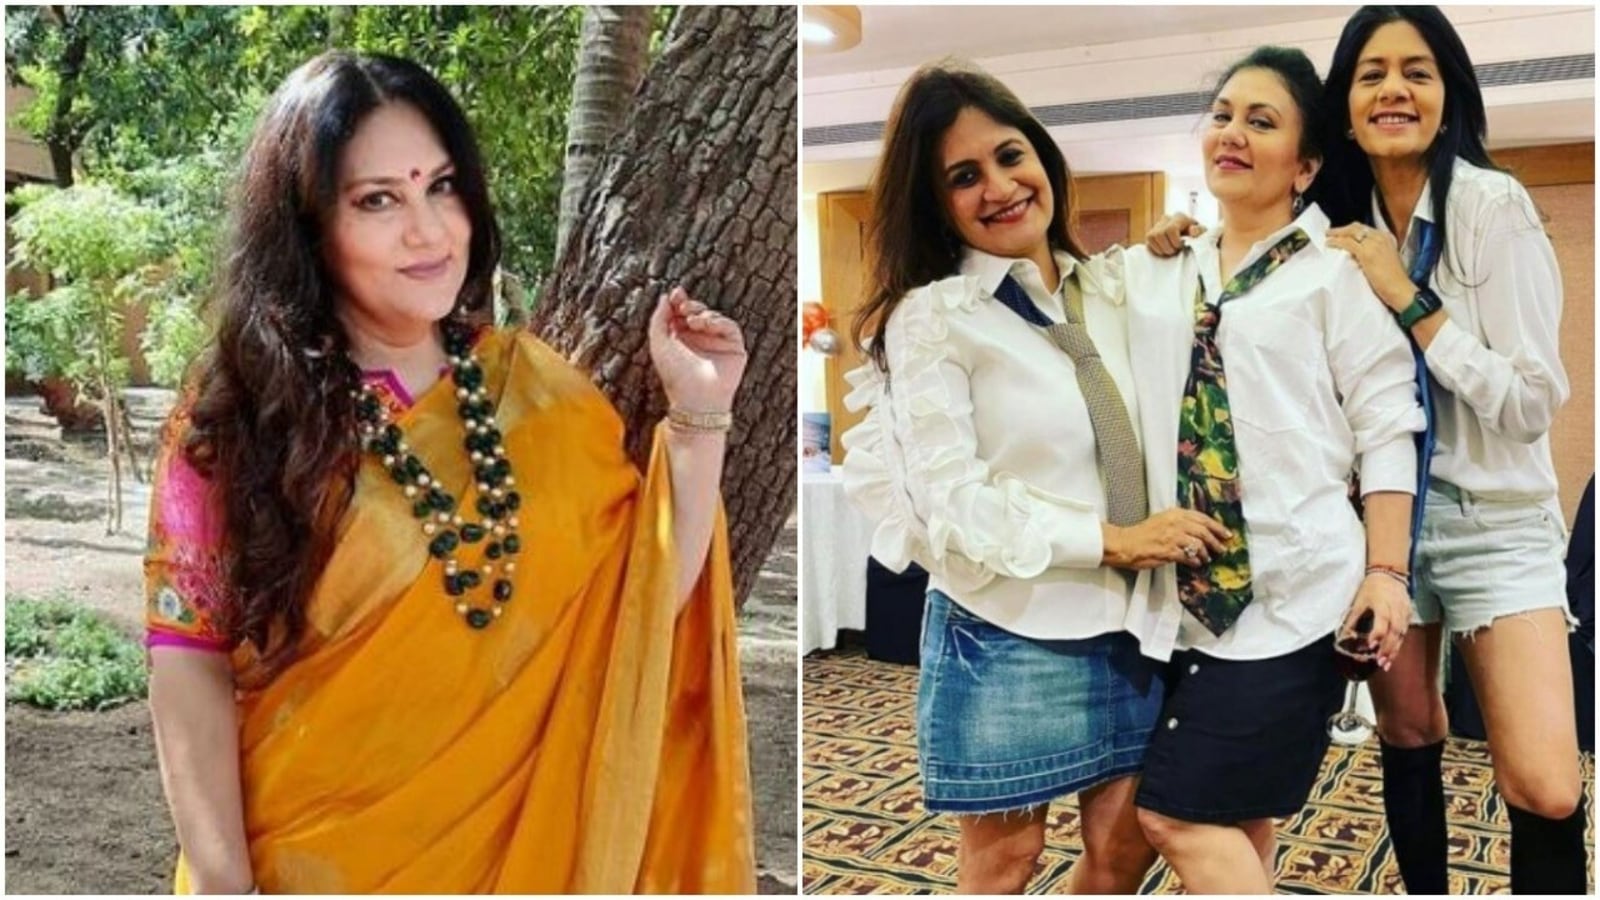 Dipika Chikhlia says she ‘wasn’t drinking alcohol’ after getting trolled for school uniform pic: ‘People see me as Sita’